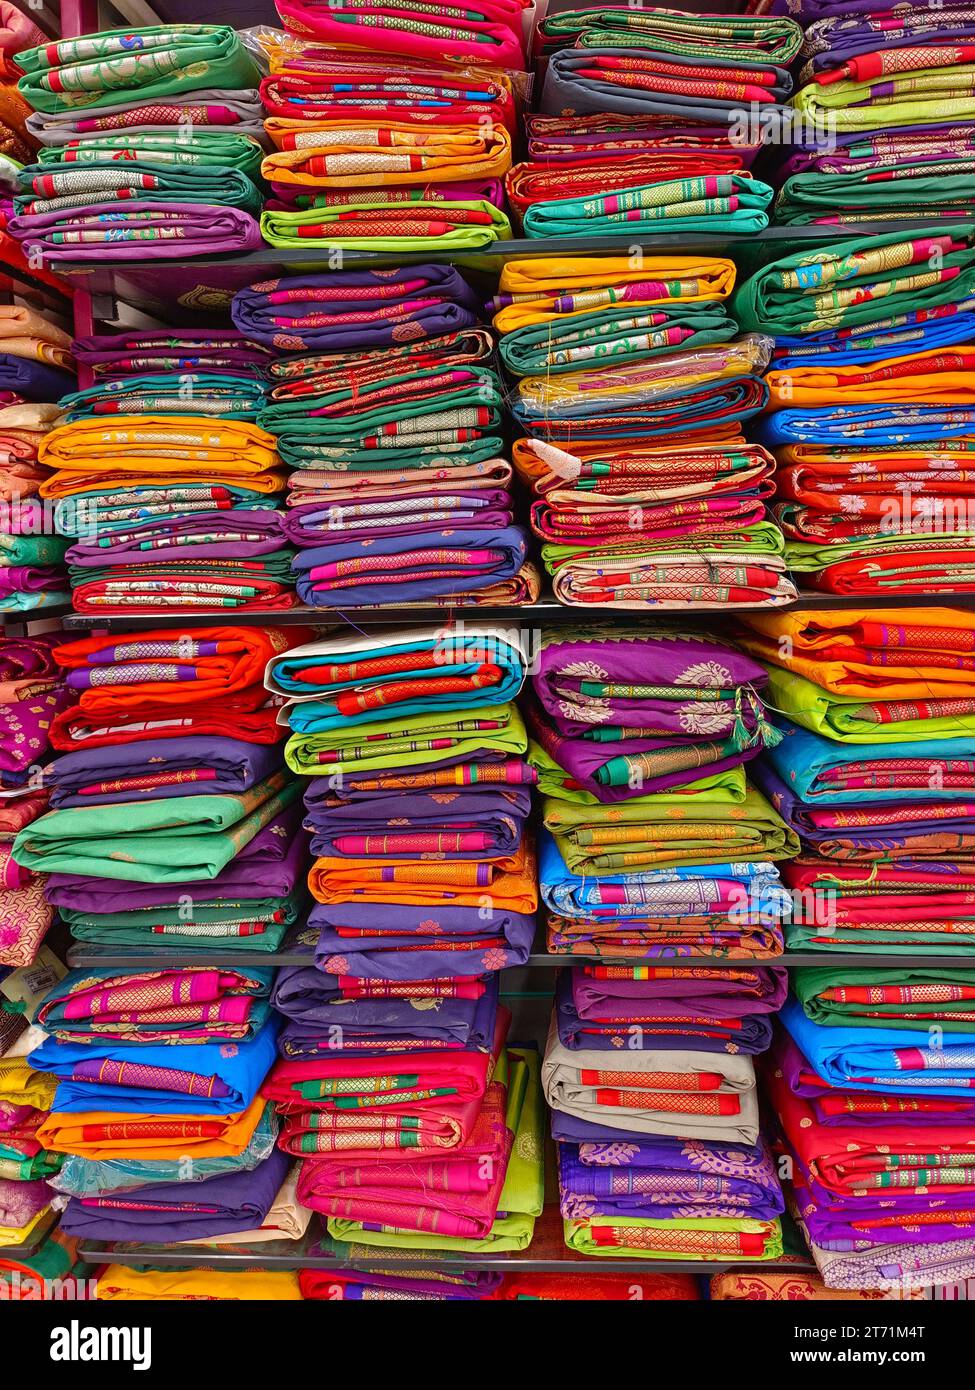 Neatly stacked colorful silk saris in racks in a textile shop, These exquisite, expensive sarees are famous for their gold and silver zari, brocade. I Stock Photo